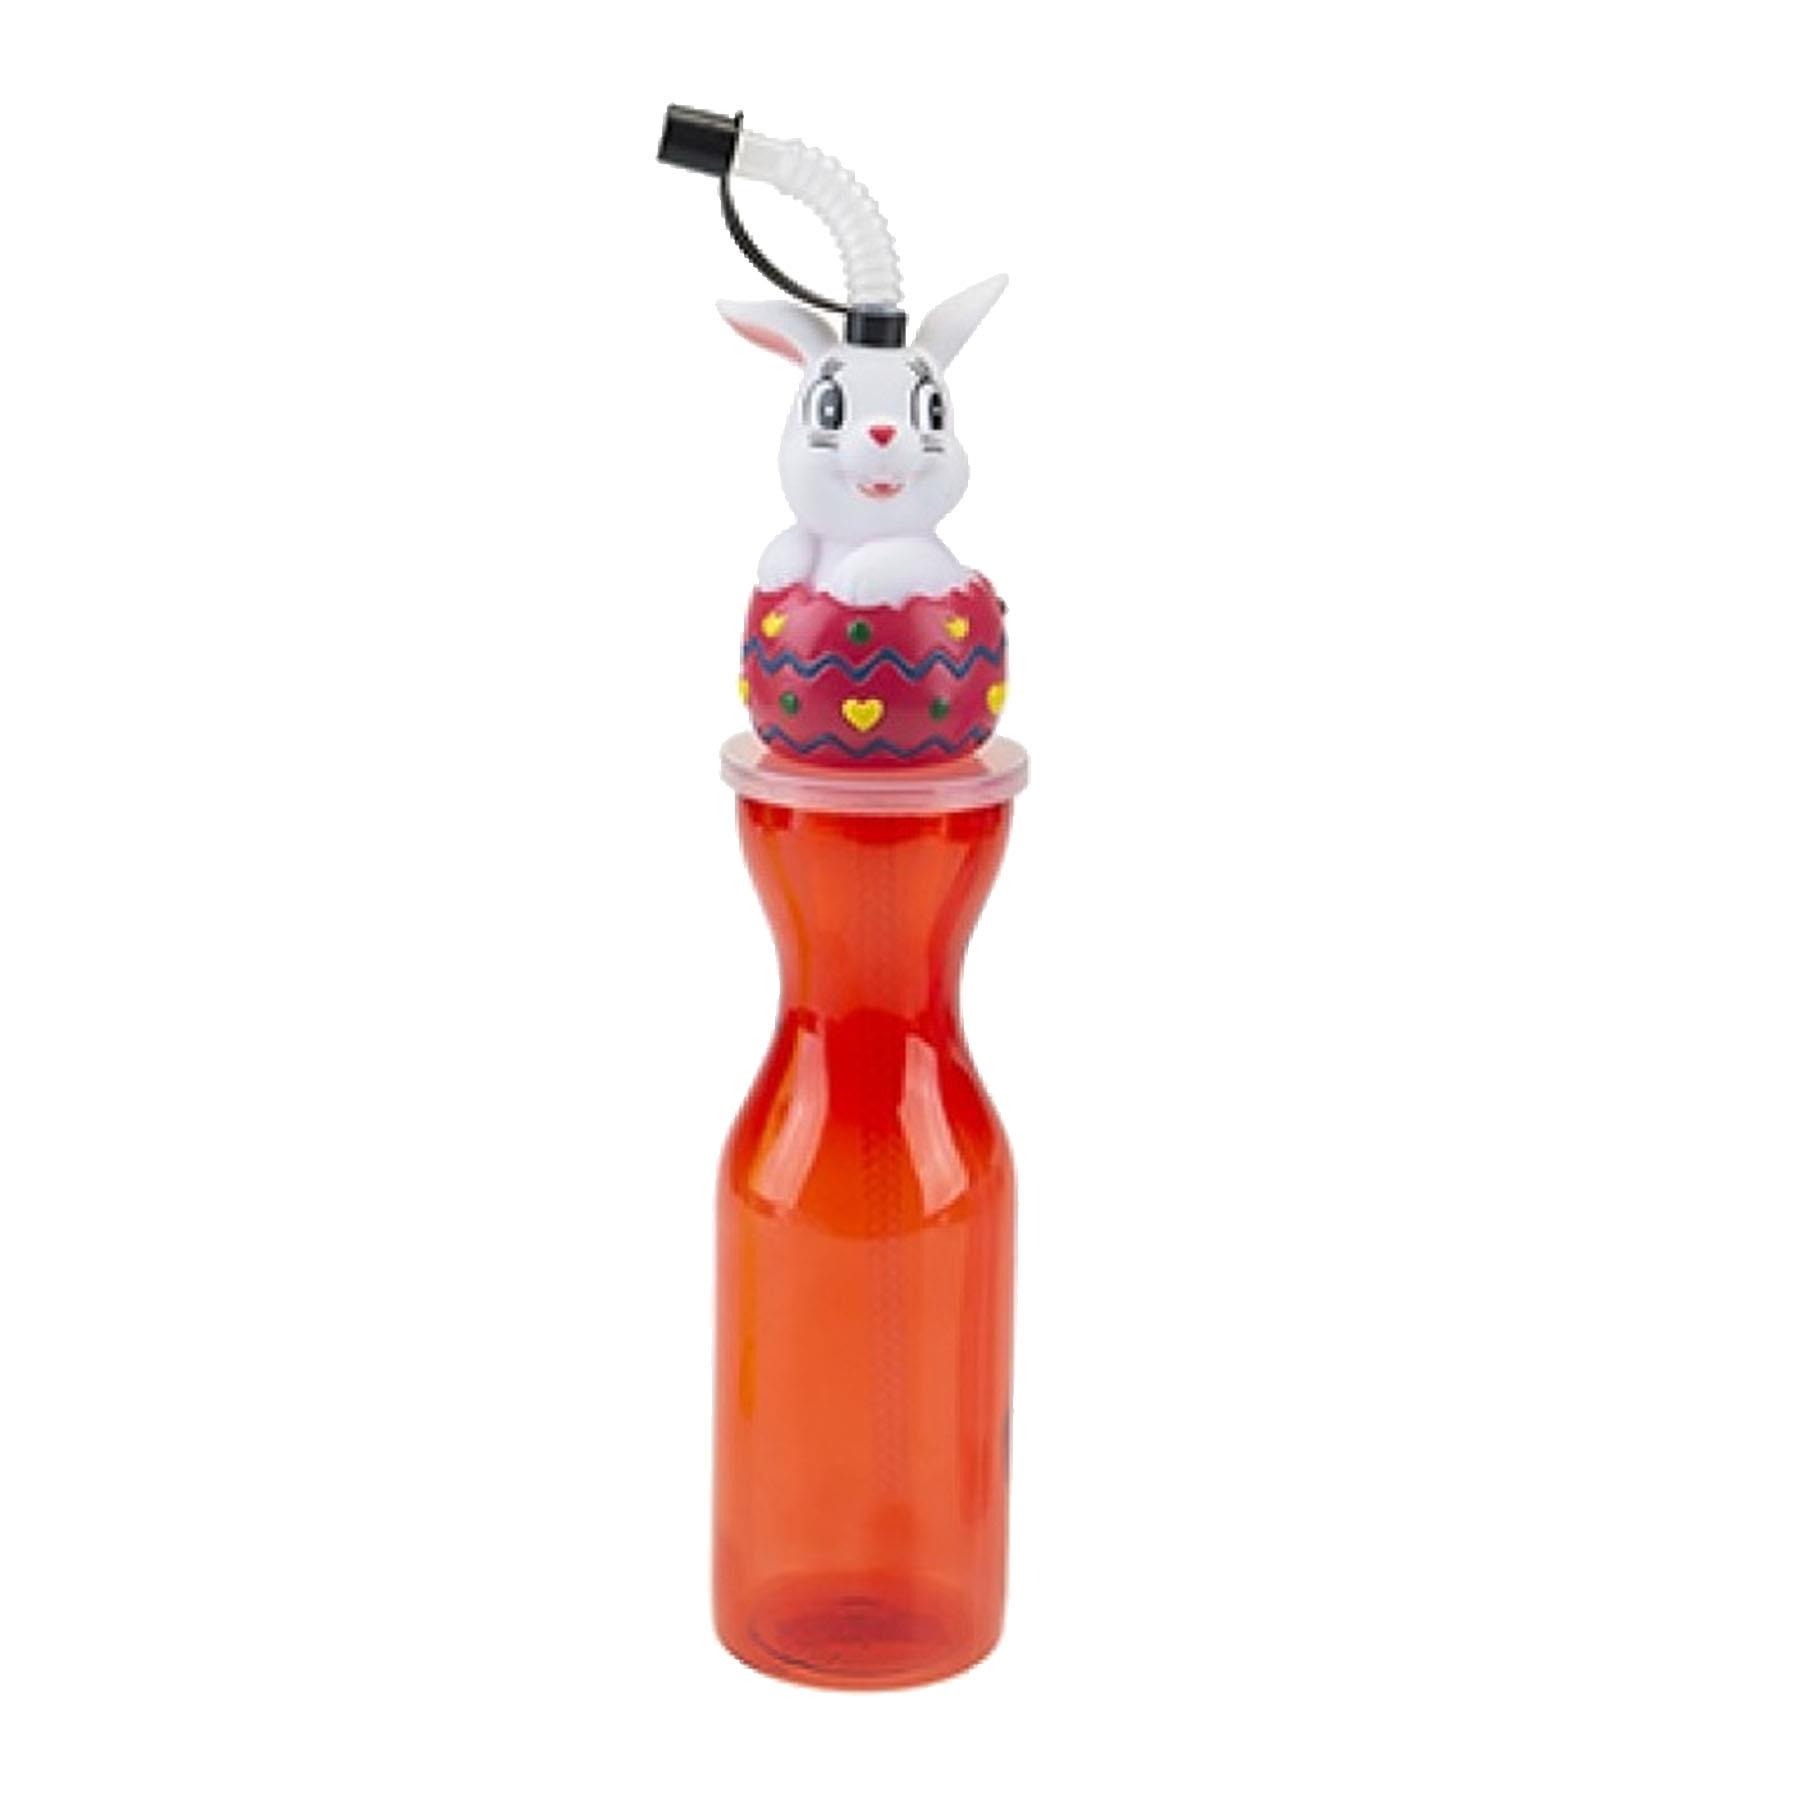 Children's 500ml Plastic Bottle with Flexi Straw and Easter Bunny Top